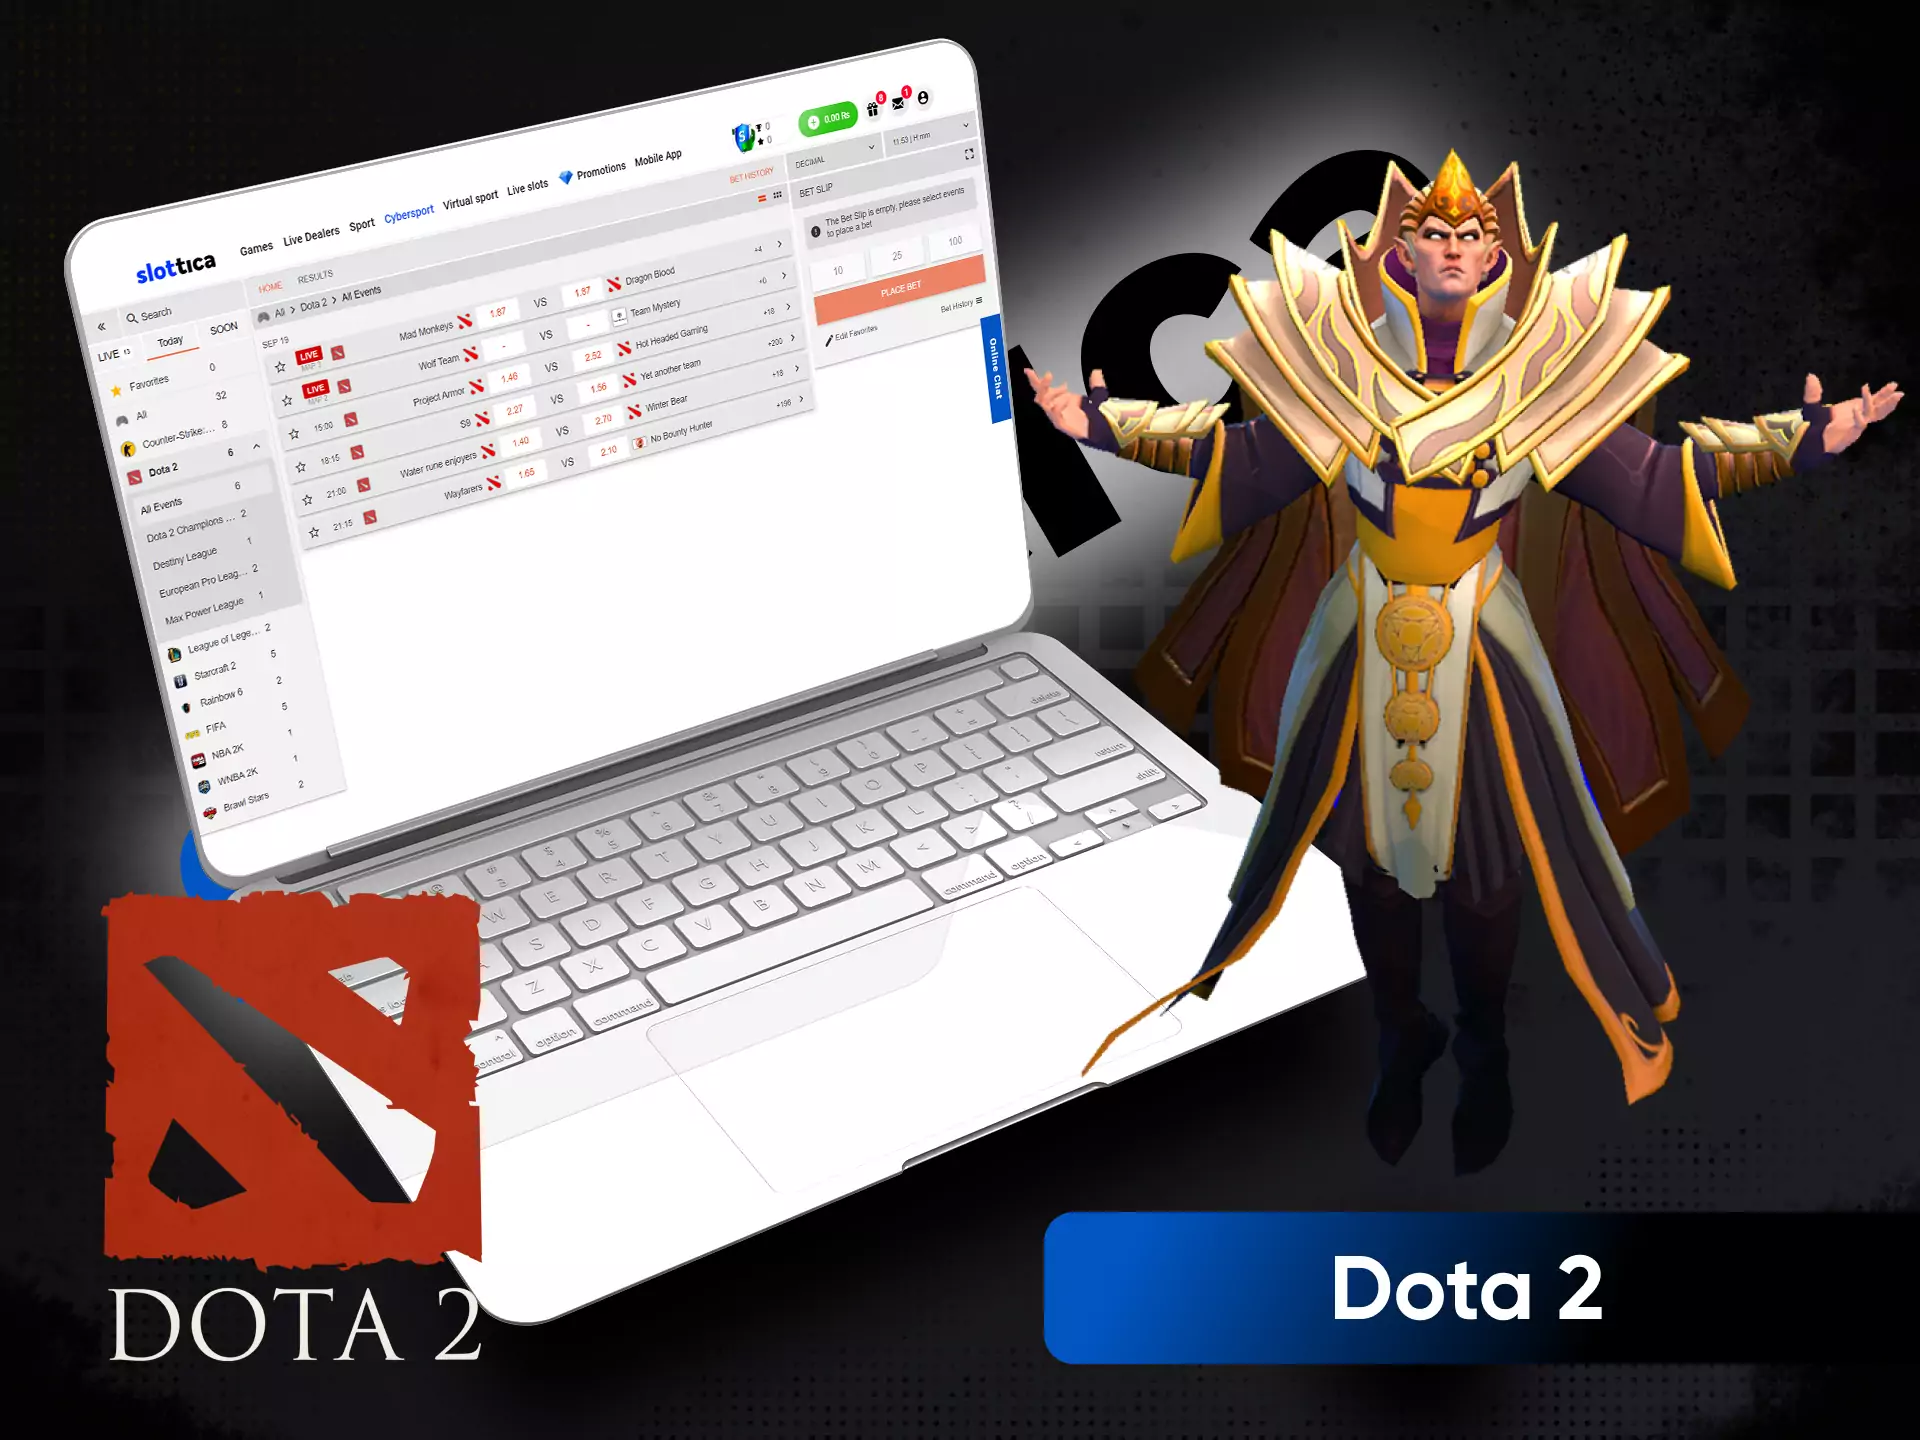 In the Slottica sportsbook, you can bet on Dota2 matches.